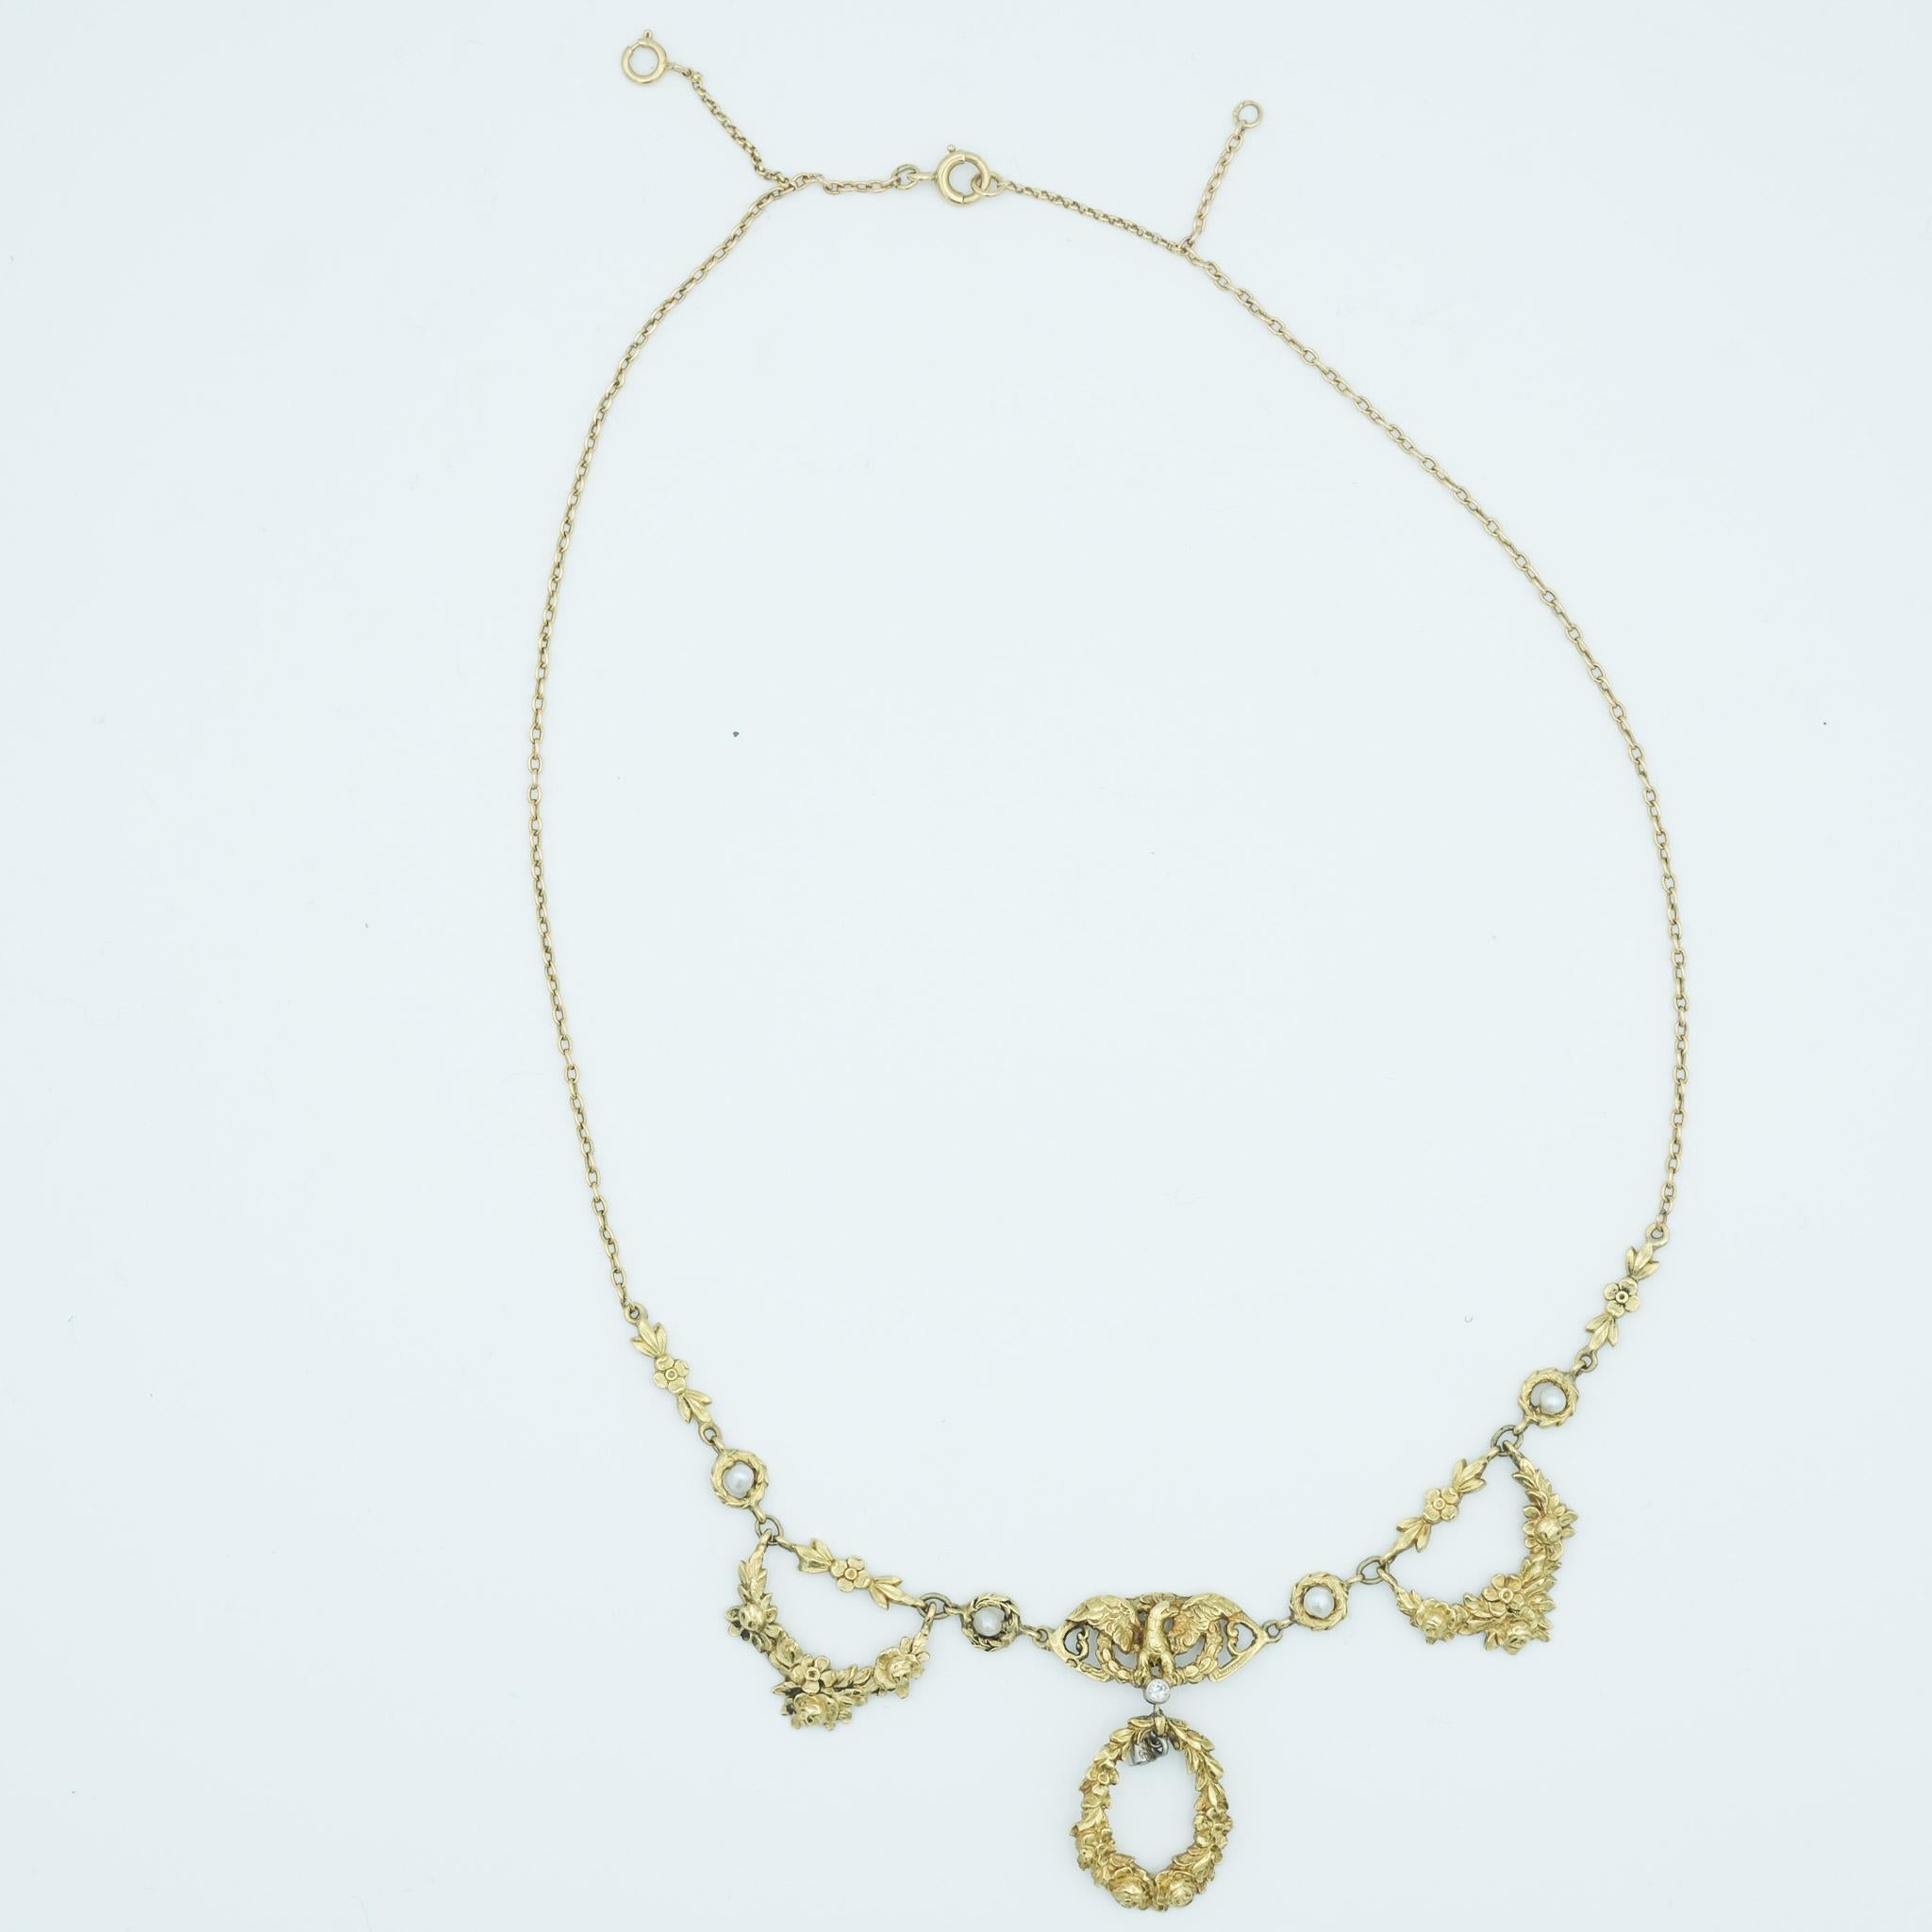 This French 18 Karat Art Nouveau necklace exemplifies the era's aesthetic with its organic and flowing design, incorporating stylized natural forms that are characteristic of the period which spanned from 1890 to 1910. The necklace features an